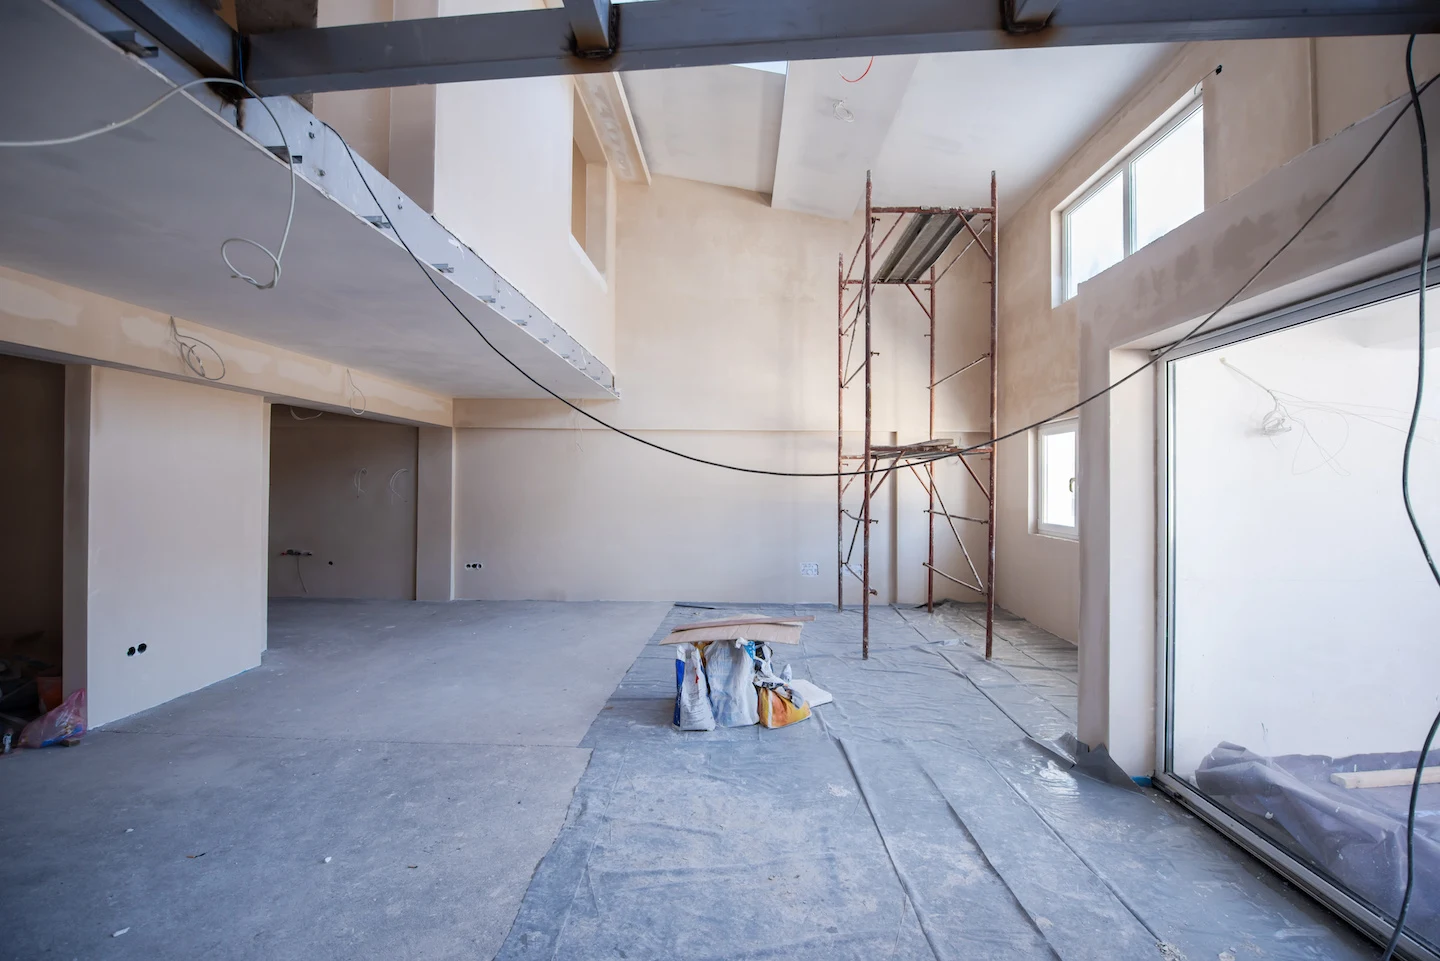 Interior of building under construction with scaffolding and loose wires.